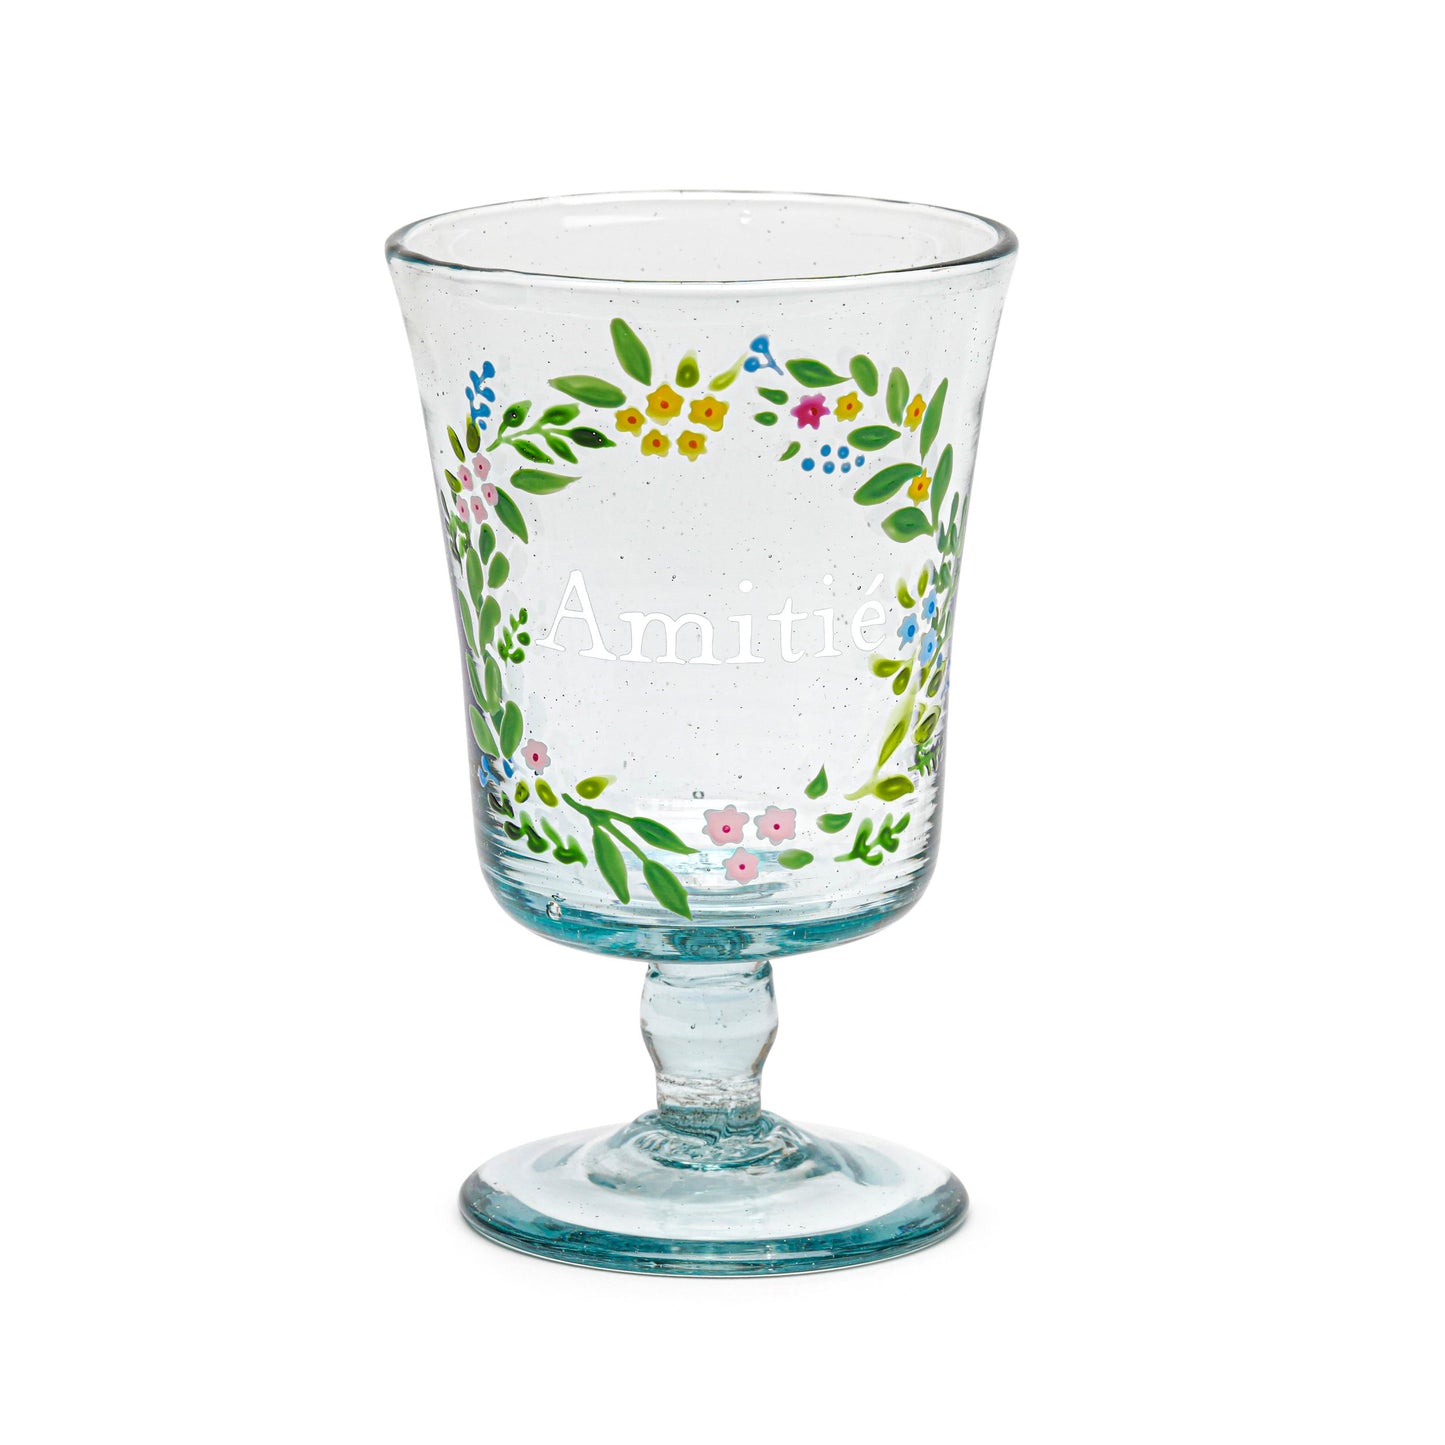 Hand Painted Wine Glass | CROWN OF FLOWERS: FRIENDSHIP